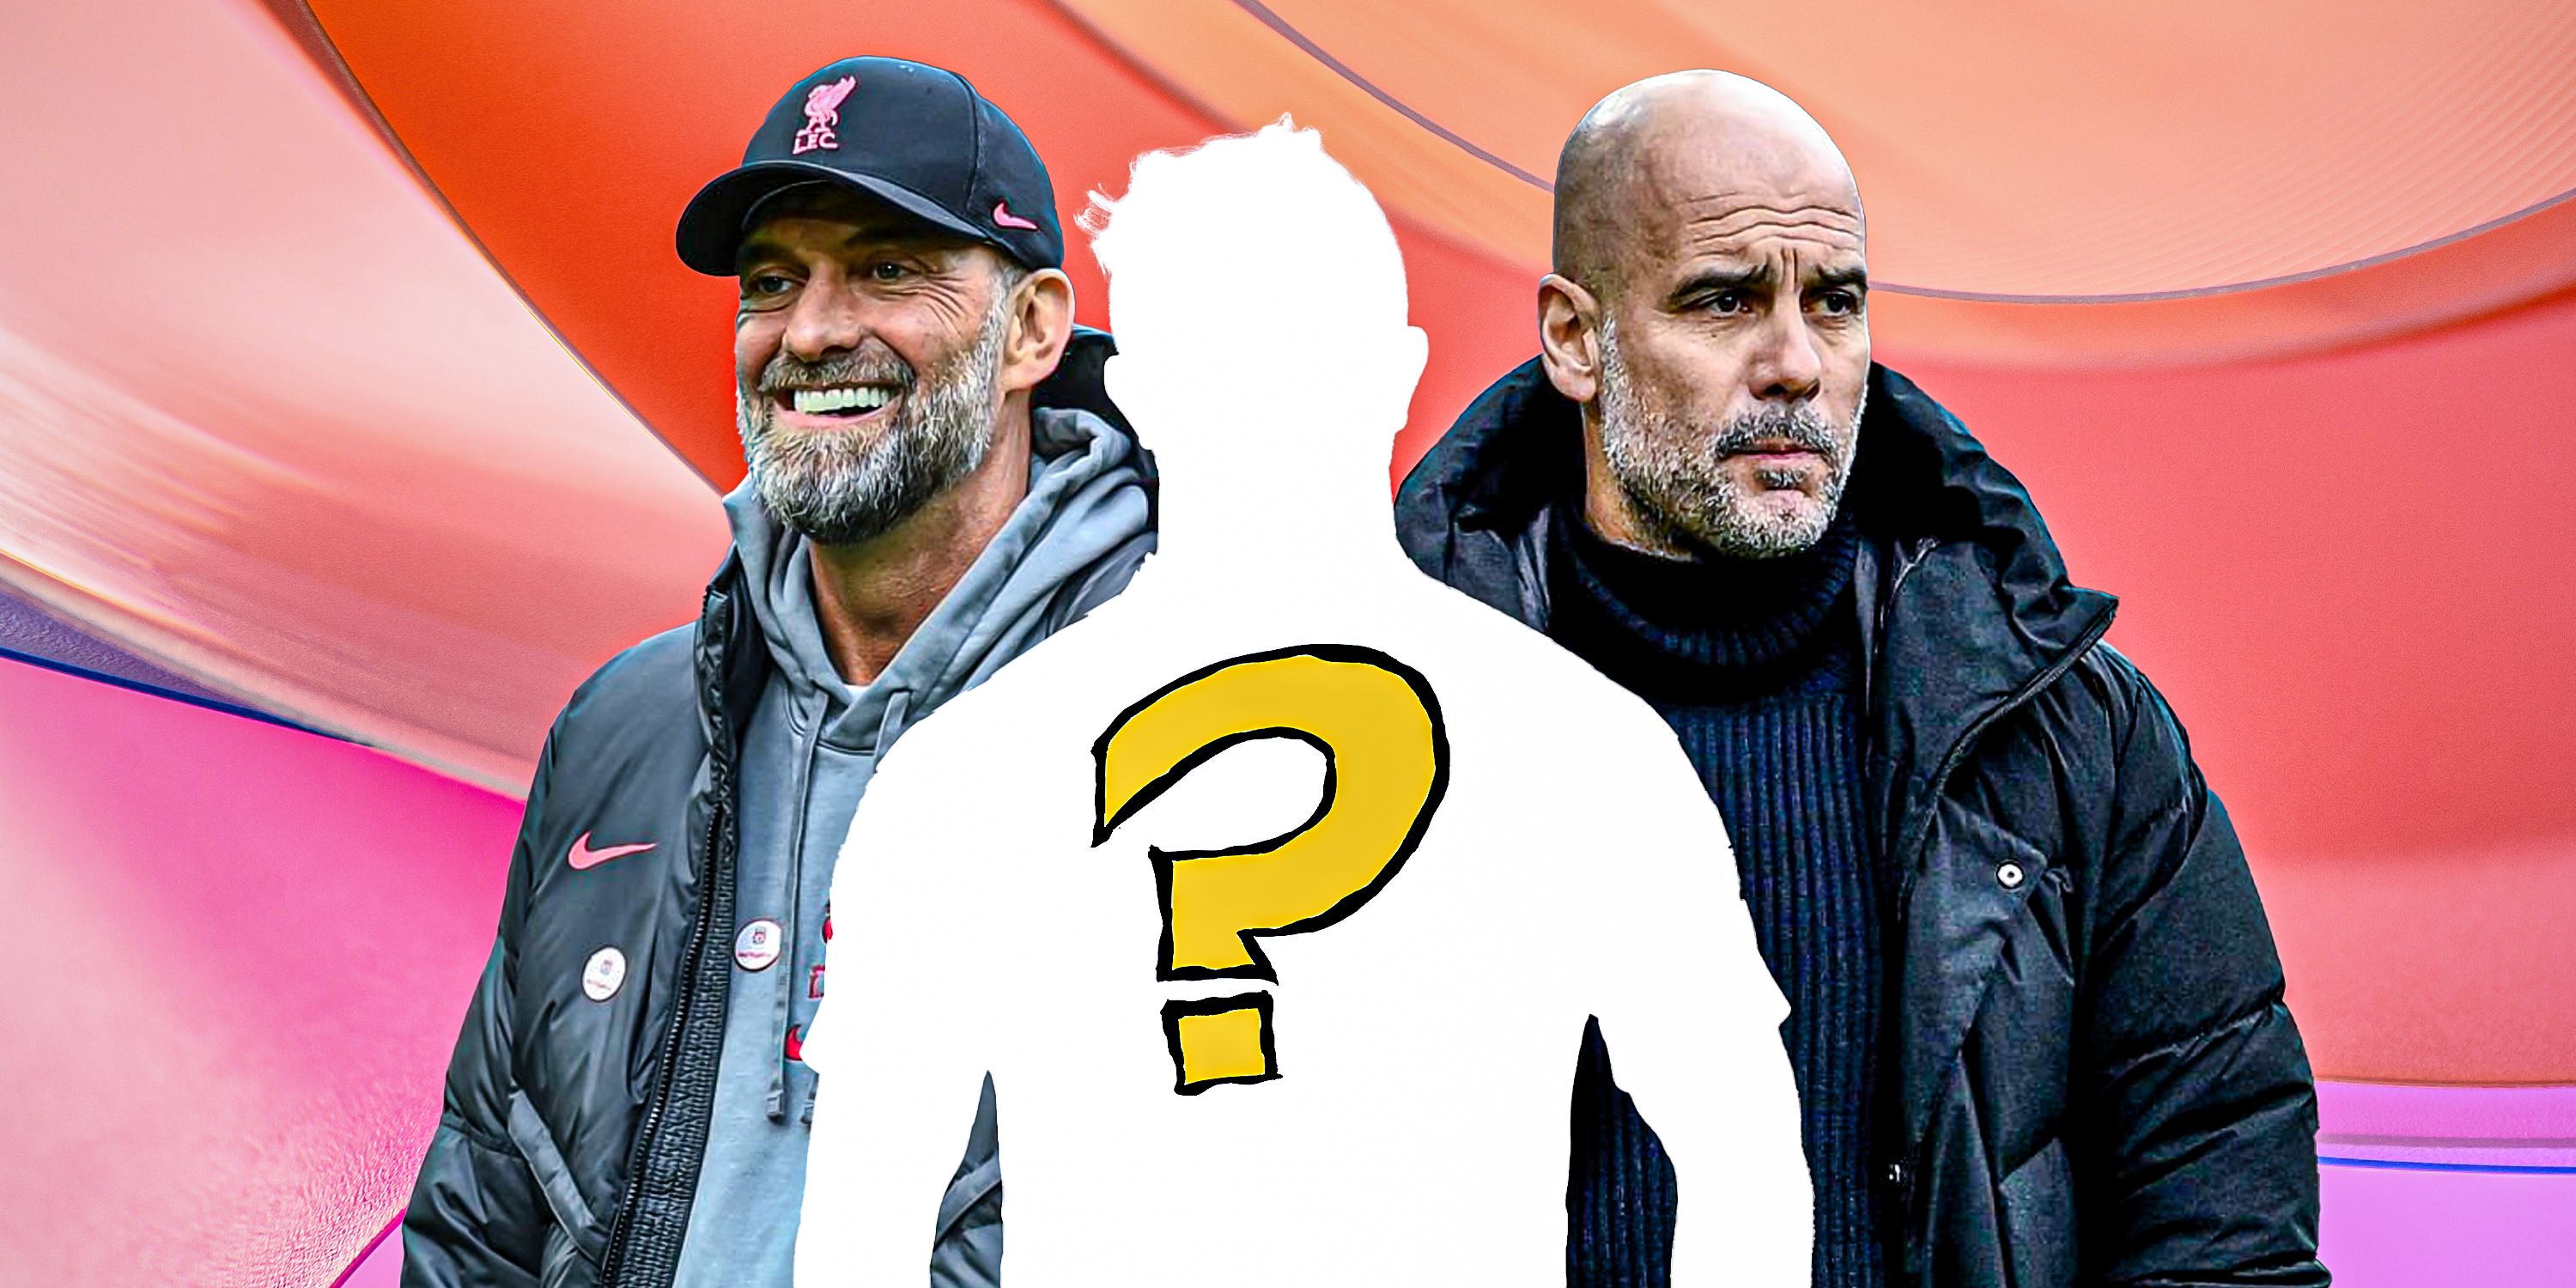 Jurgen Klopp and Pep Guardiola with a silhouette of Xherdan Shaqiri in the middle